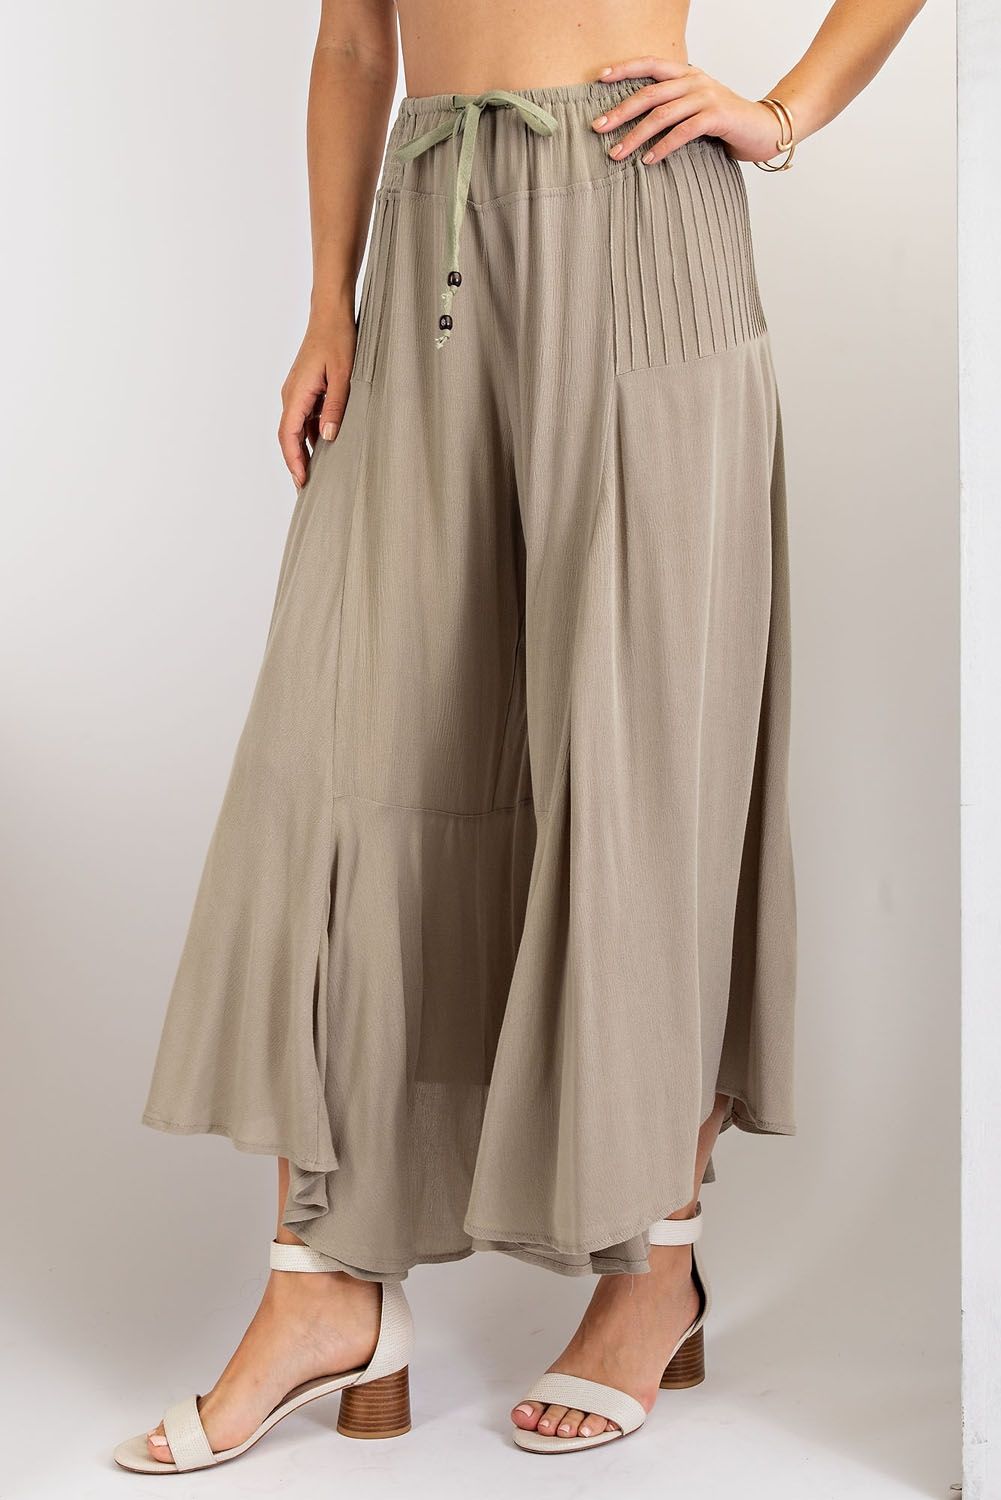 Fresh Air Rayon Gauze Ruffle Bottom Wide Leg Pants  Ivy and Pearl Boutique Sage S 